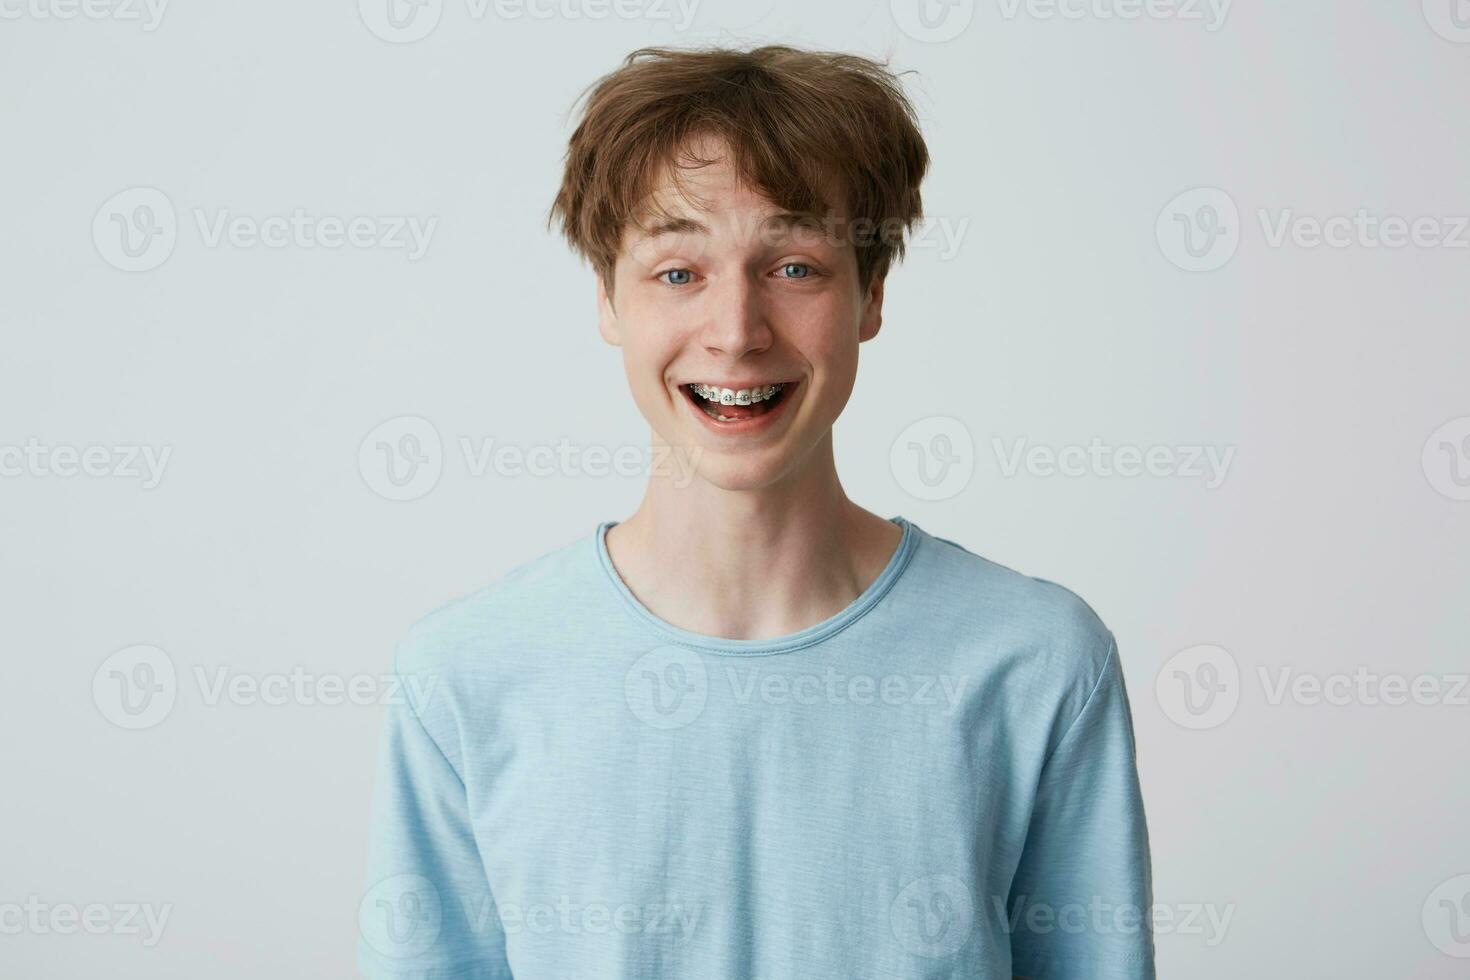 Incredibly, over-measure joyful guy smiles broadly, shows enthusiasm and passion, disheveled hair, mouth wide opened with braces on teeth, feels glad, over white background photo